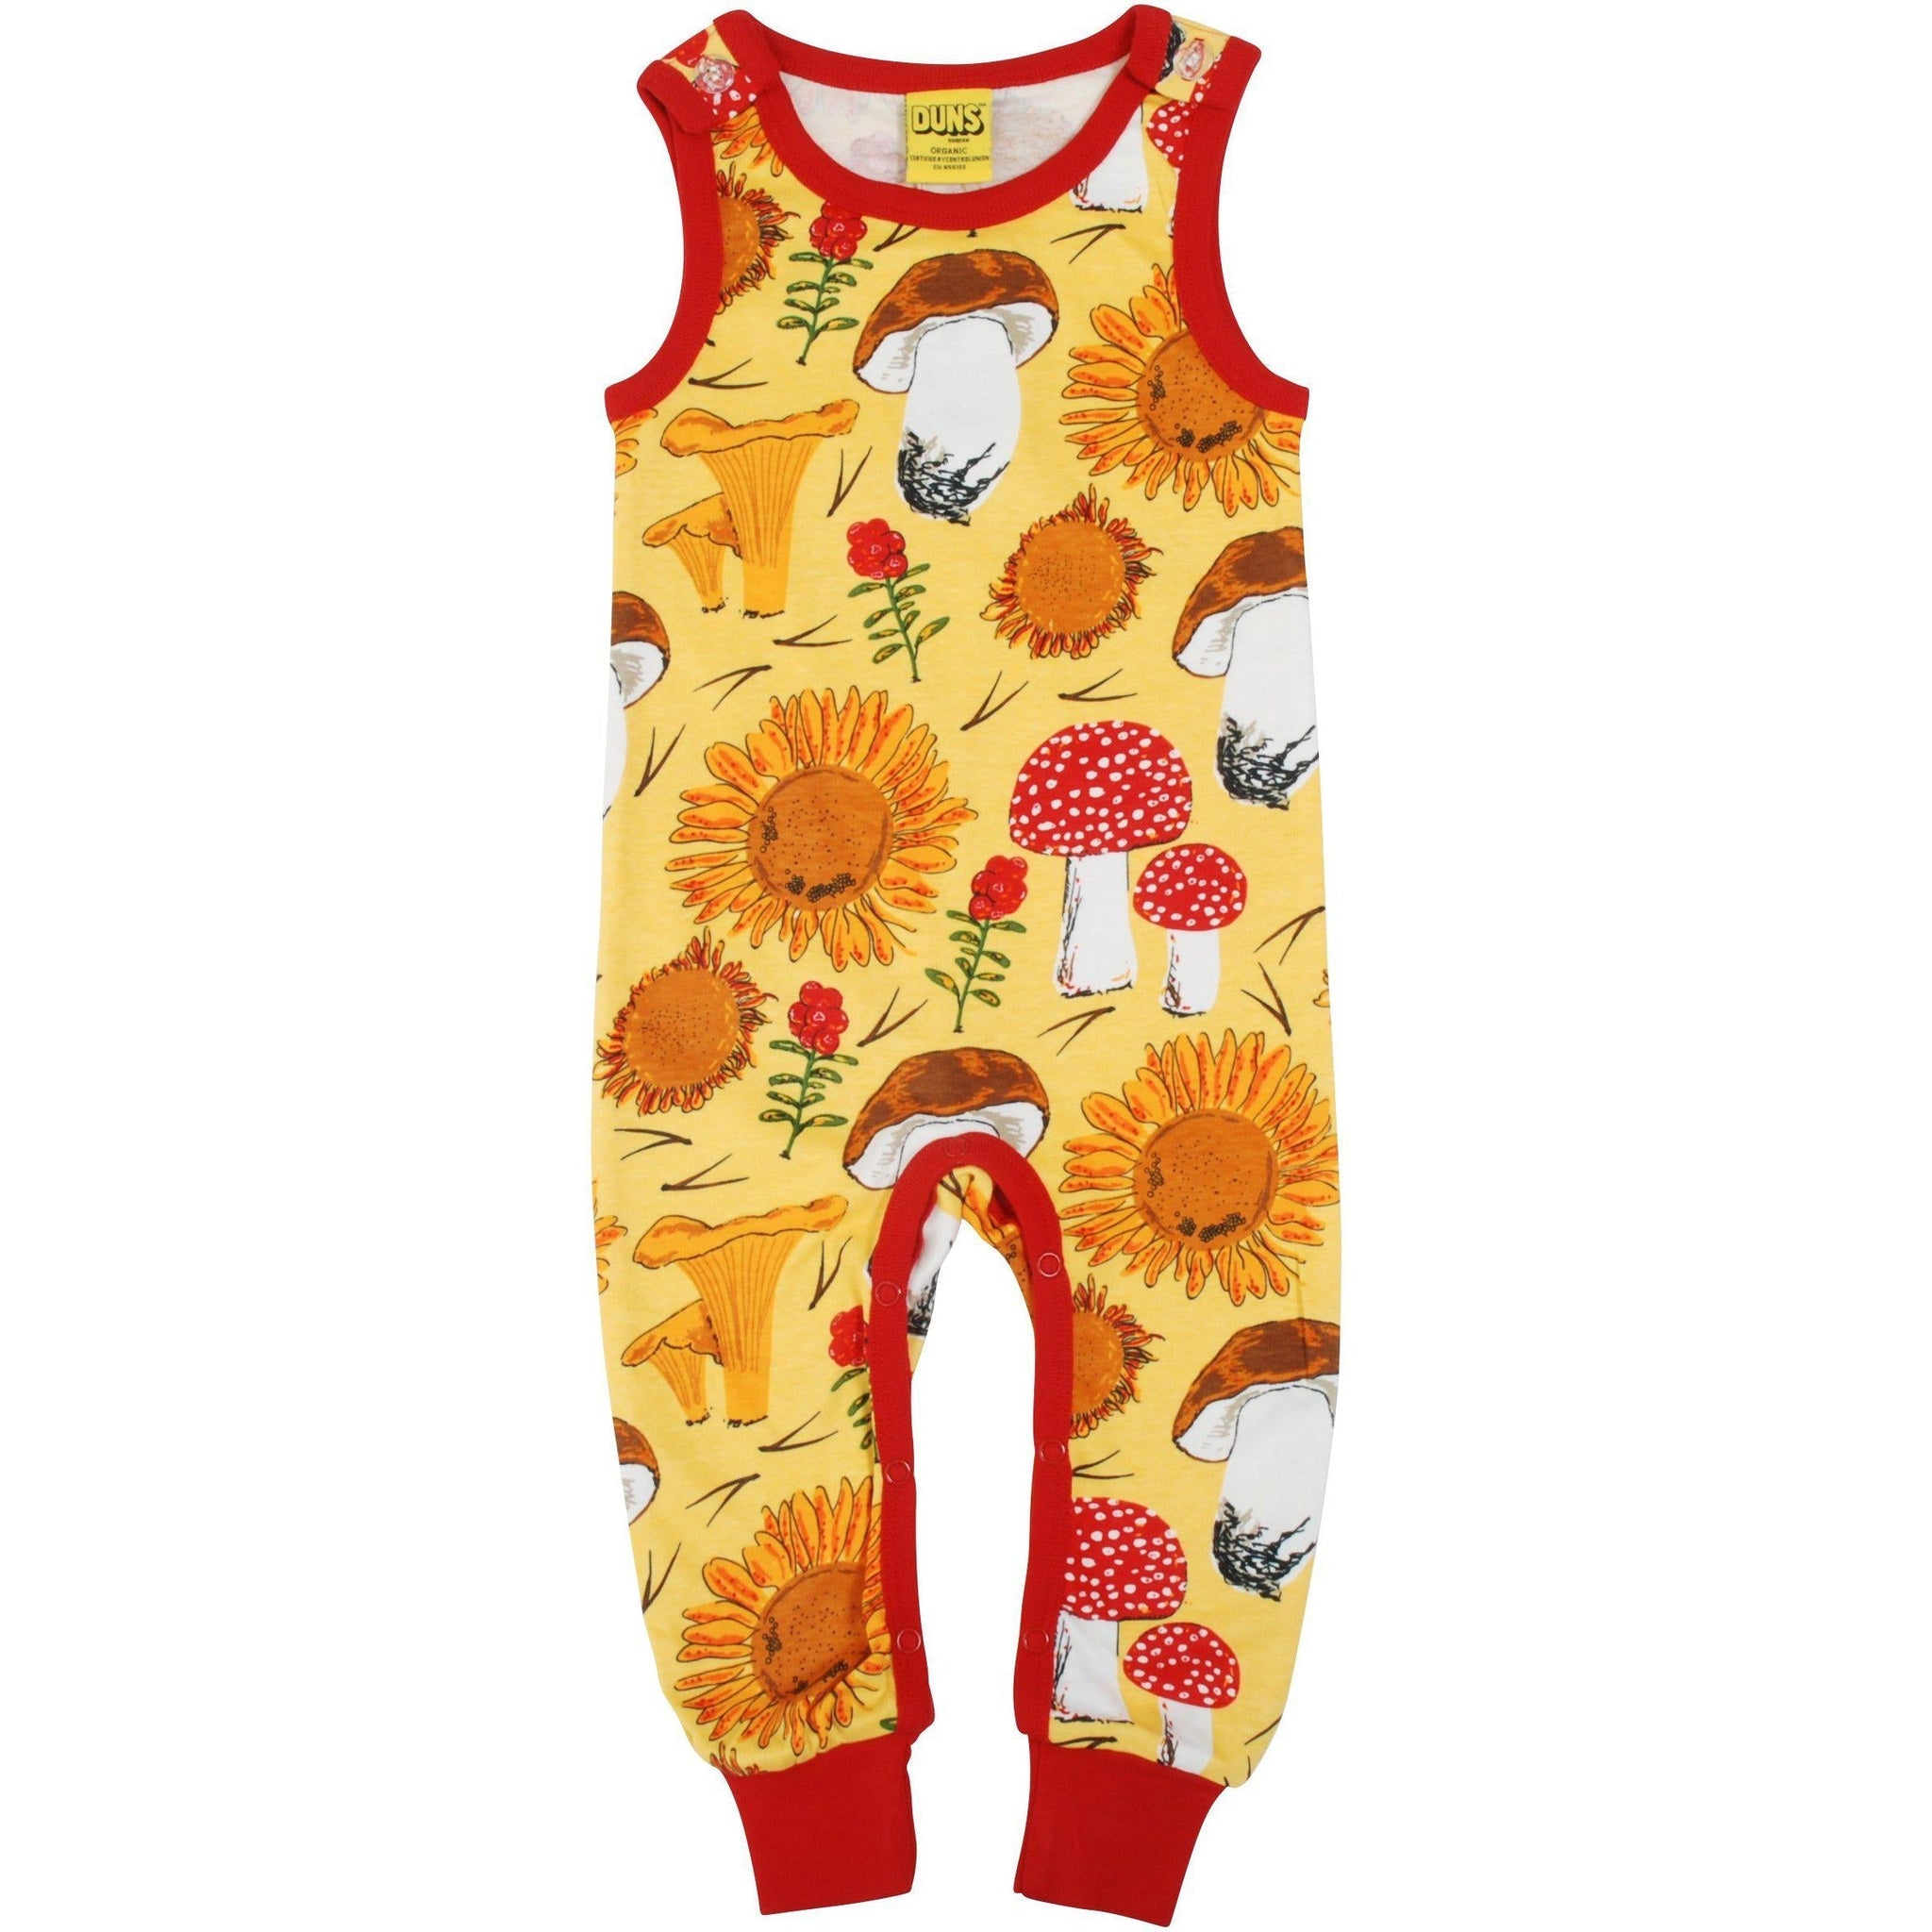 DUNS Sweden - Sunflowers and Mushrooms (Sunshine Yellow) Dungarees (9 Months)